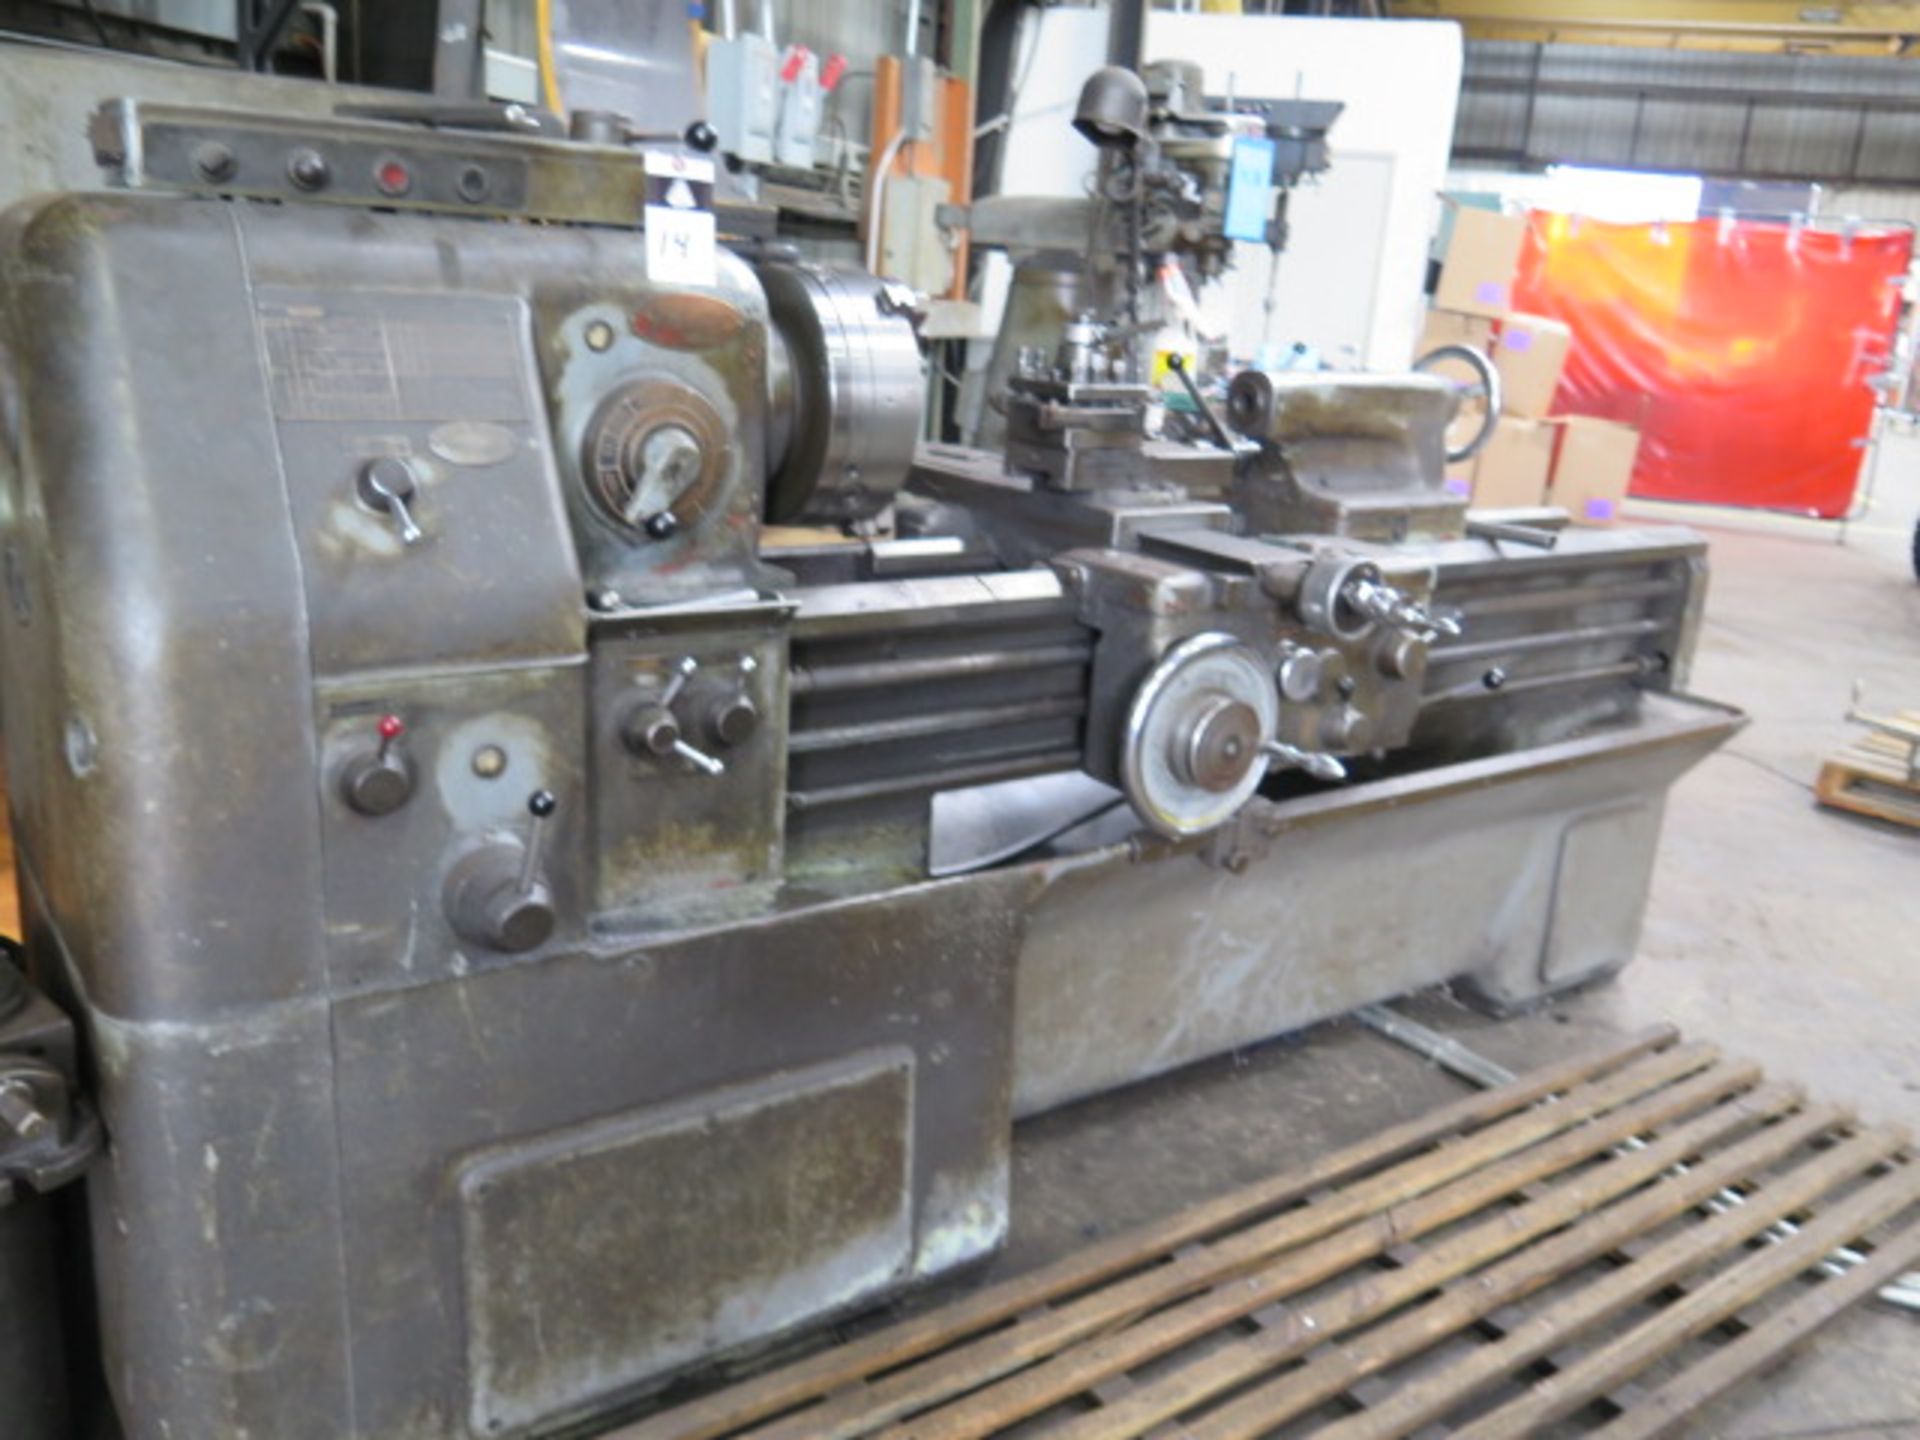 Okuma LS 18” x 54” Geared Head Gap Bed Lathe s/n 4112-10712 w/35-1800 RPM, Inch Threading,SOLD AS IS - Image 2 of 12